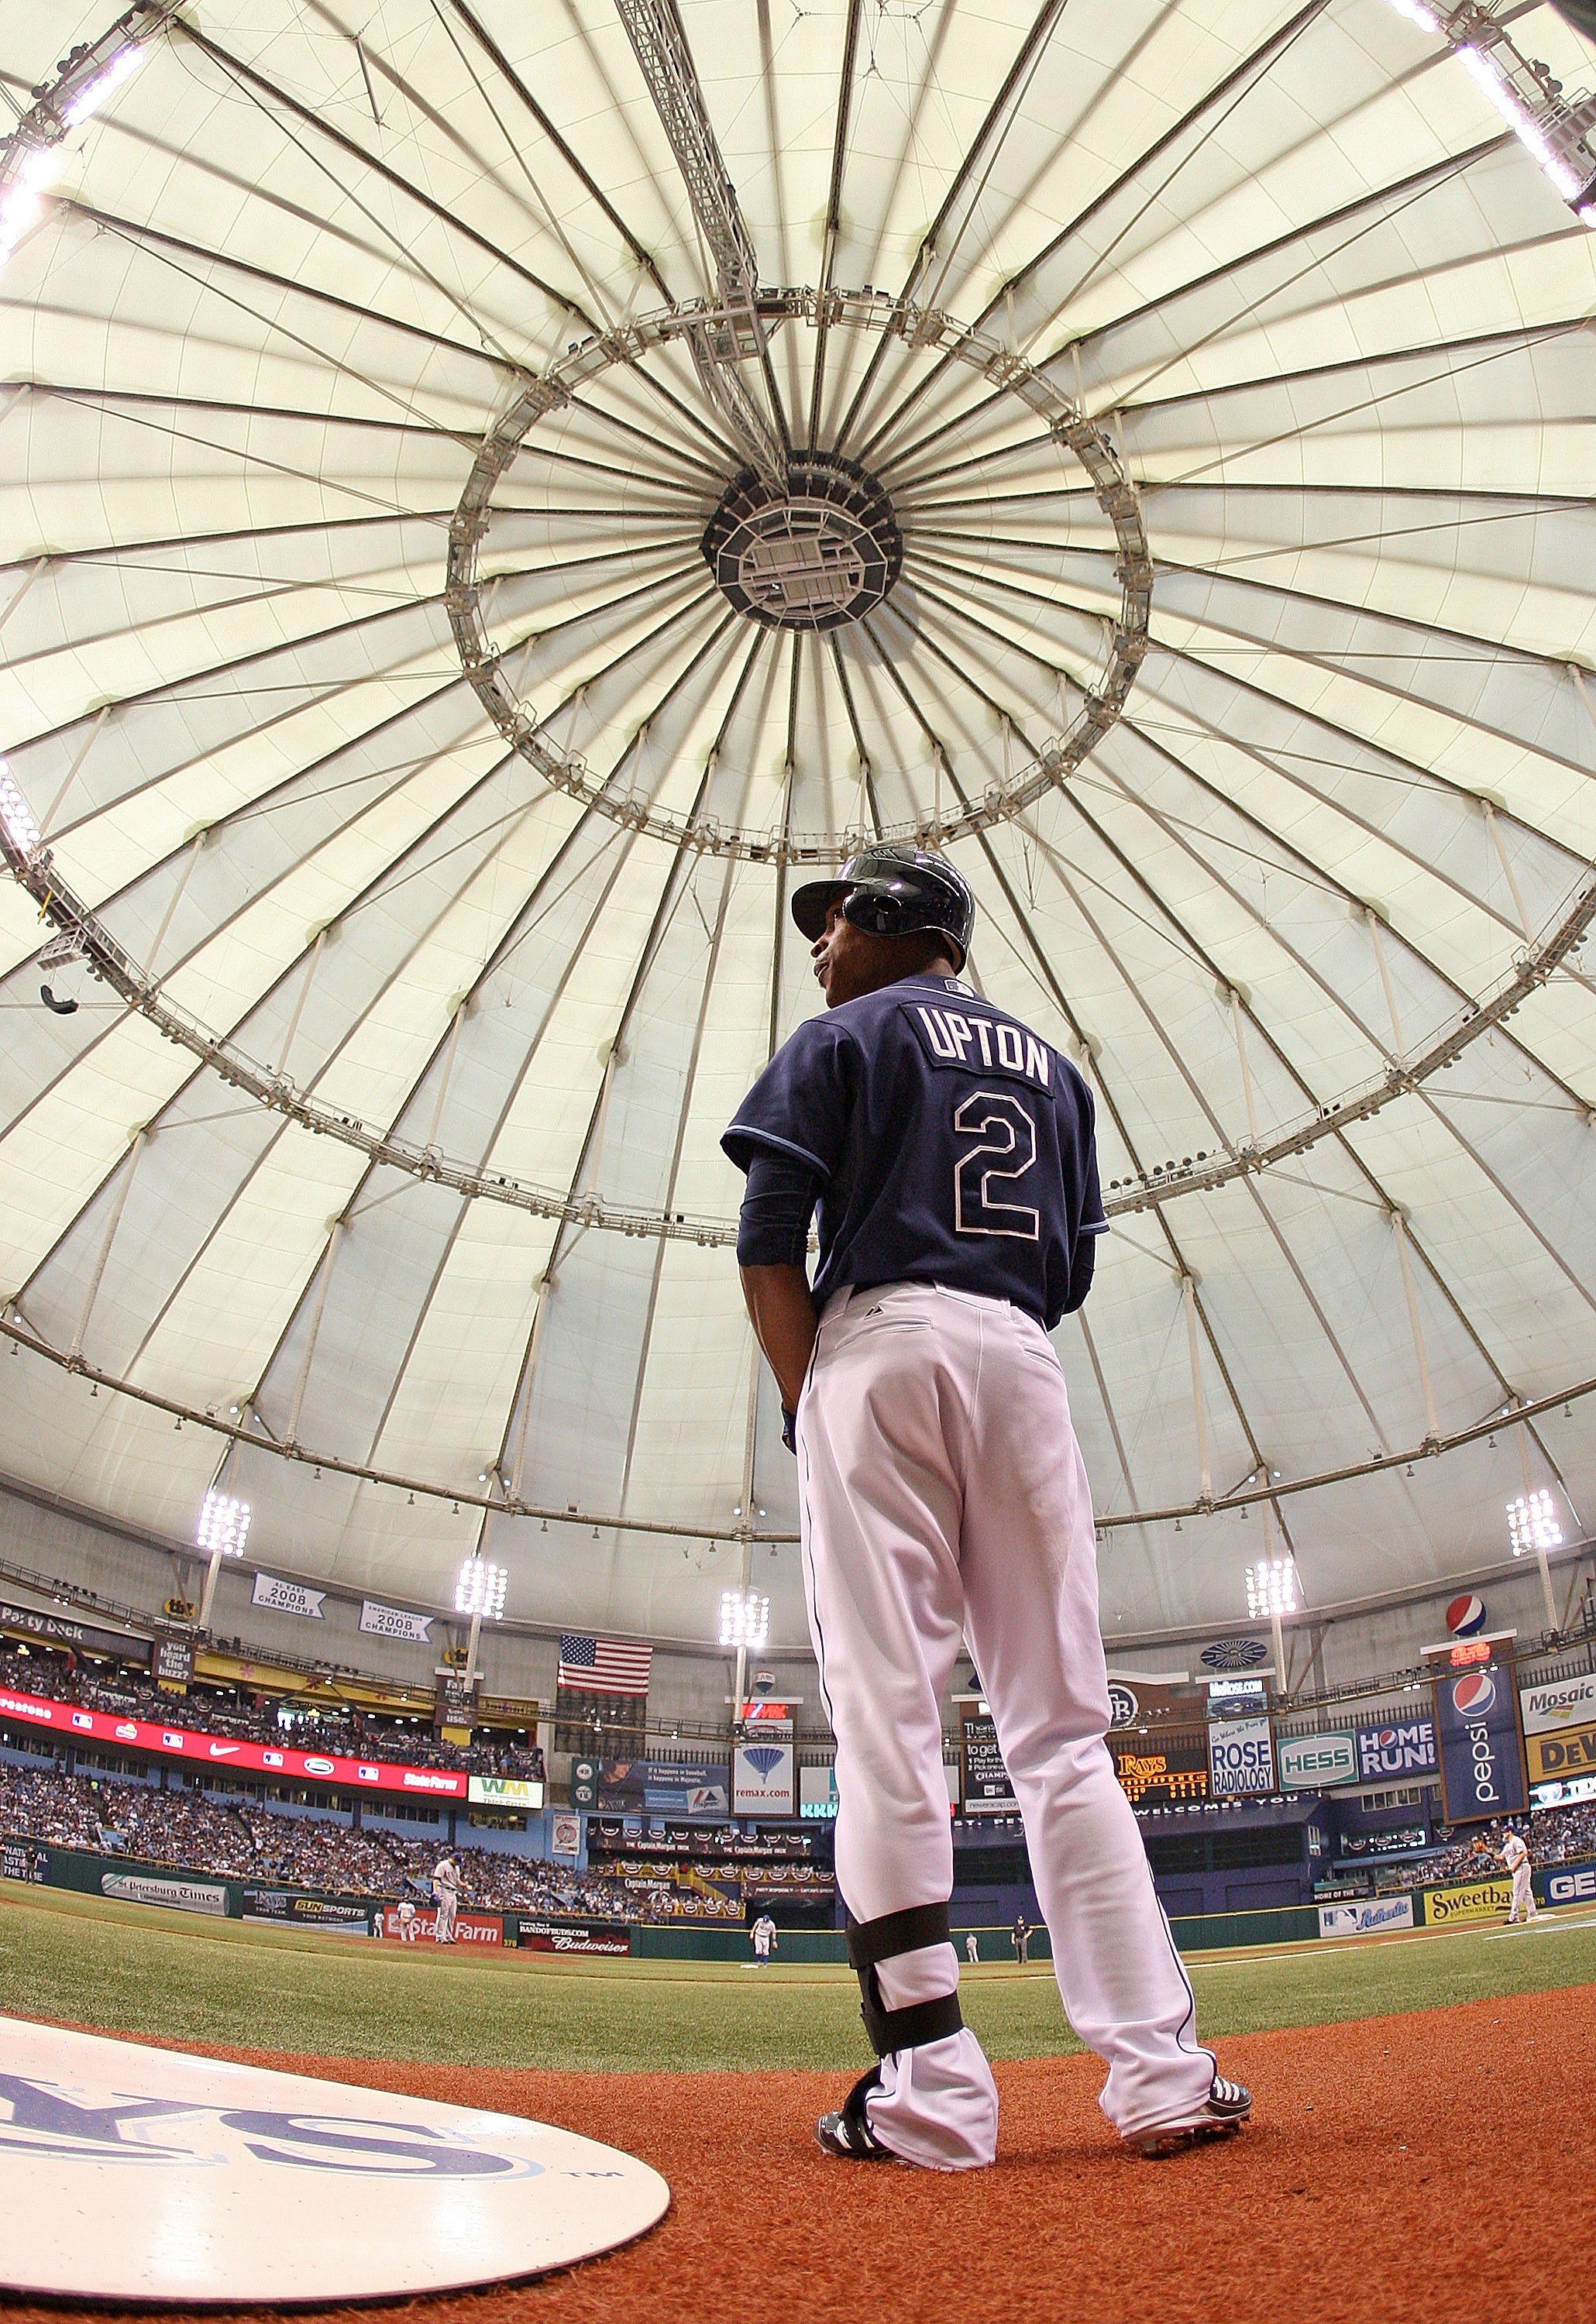 ST PETERSBURG, FL - OCTOBER 07:  B.J. Upton #2 of the Tampa Bay Rays waits on deck during Game 2 of the ALDS against the Texas Rangers at Tropicana Field on October 7, 2010 in St. Petersburg, Florida.  (Photo by Mike Ehrmann/Getty Images)